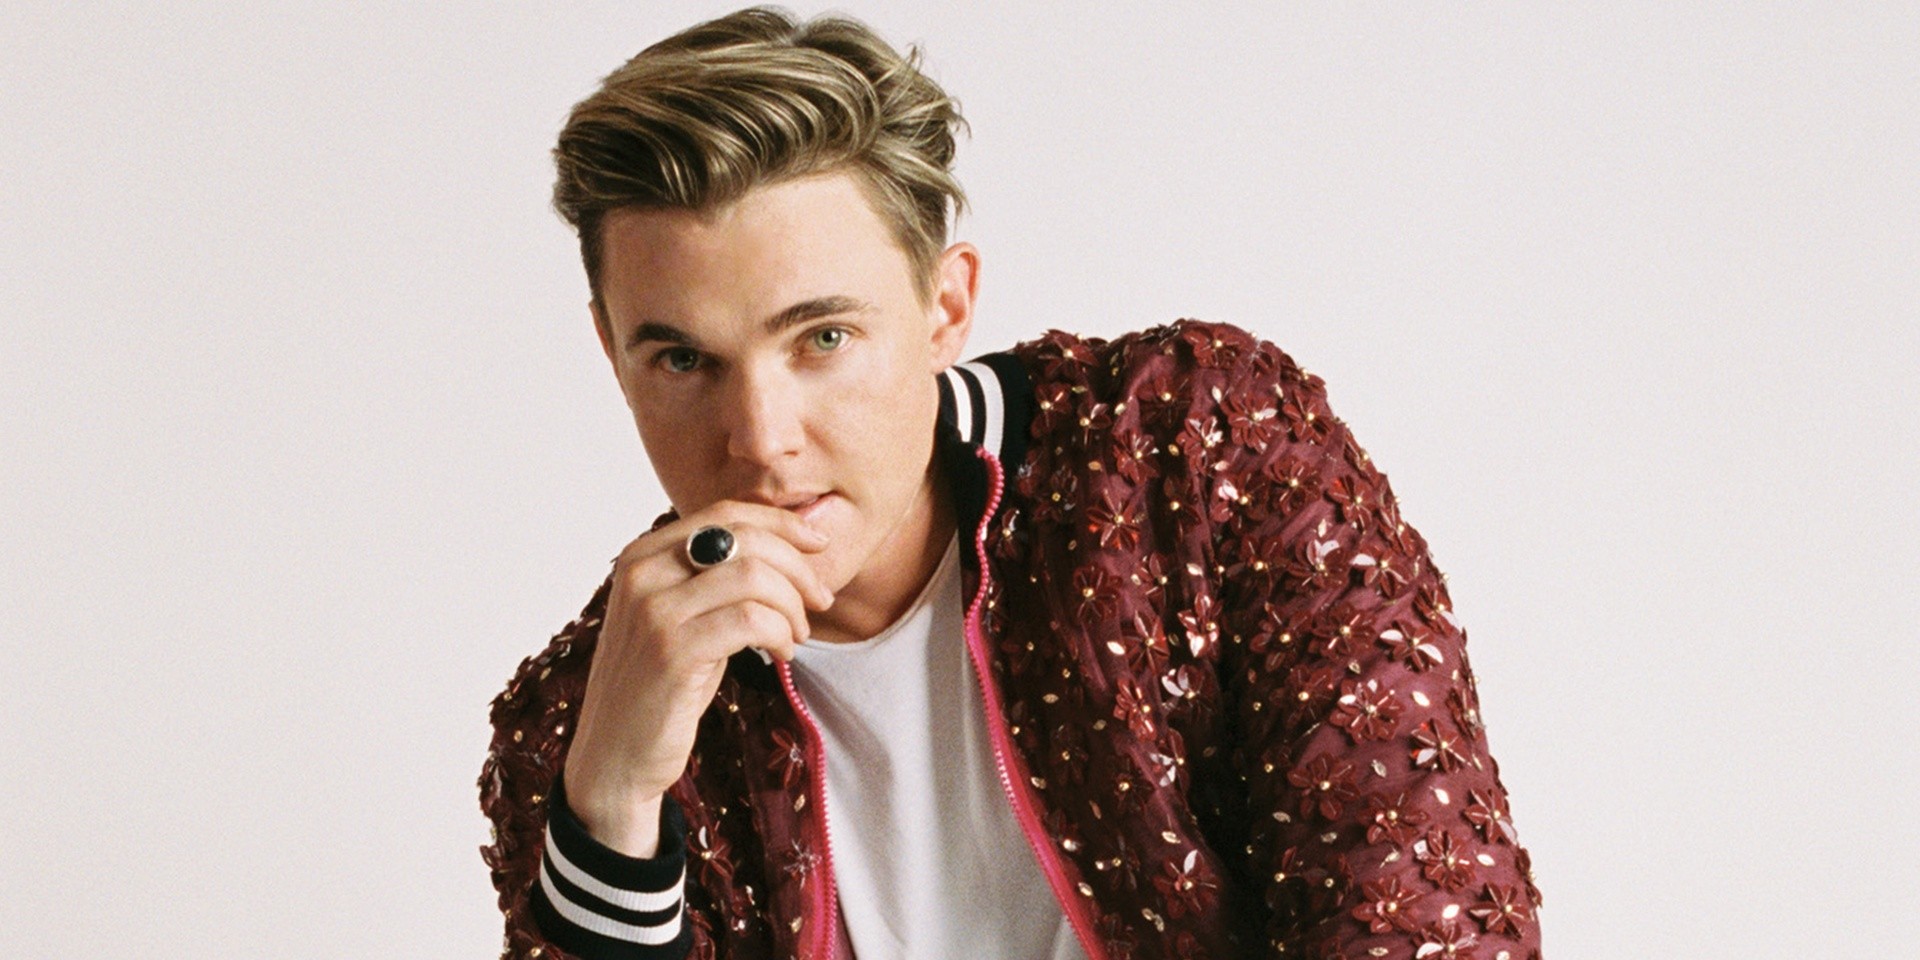 "I got to see the tail end of the golden age of selling music": An interview with Jesse McCartney